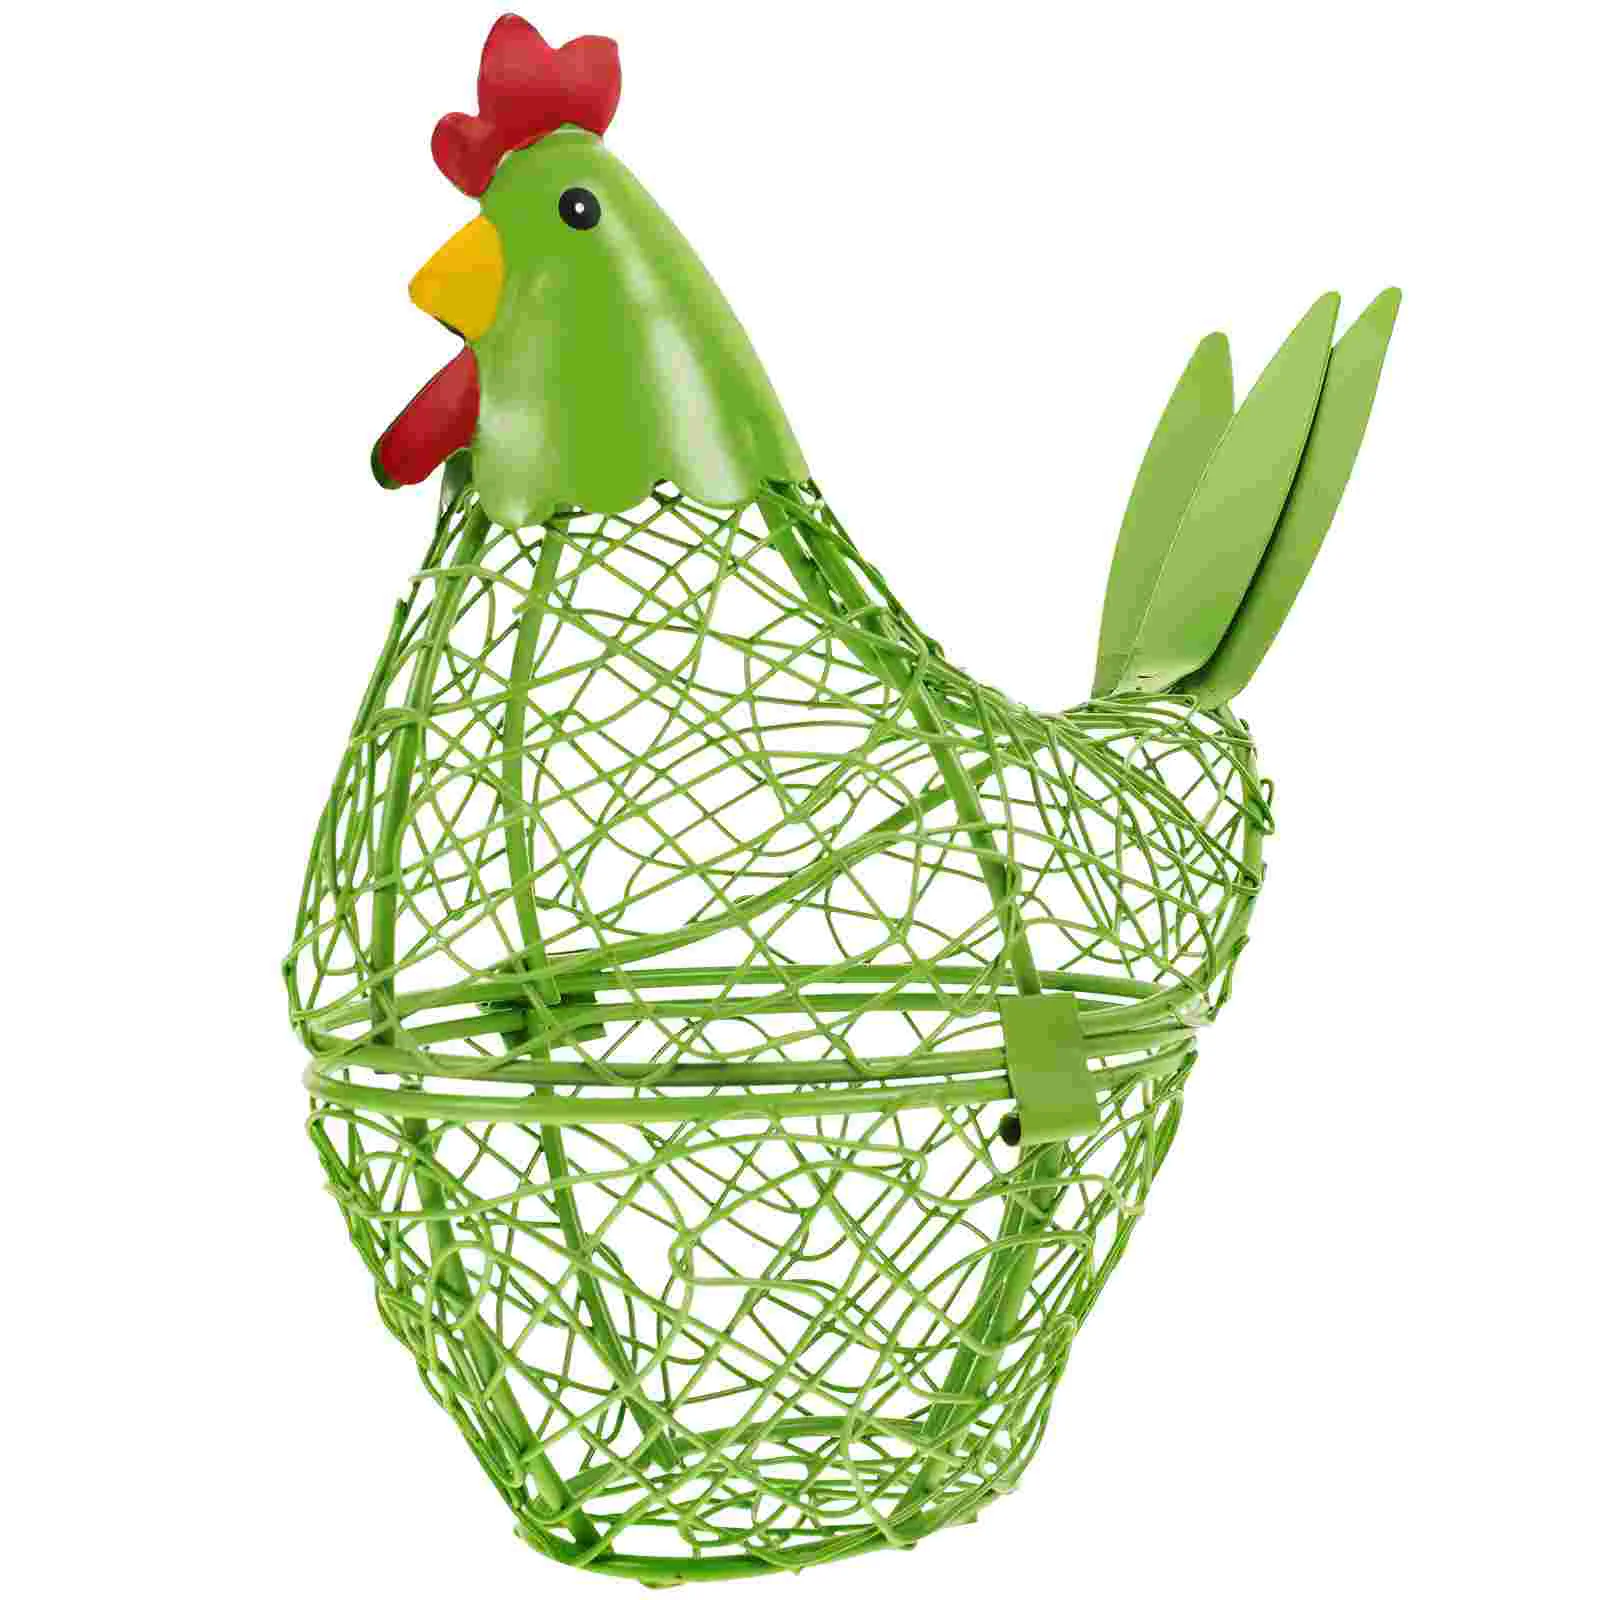 

Egg Basket Wire Baskets Chicken Holder Container Storage Gathering Collecting Fruit Metal Easter Kitchen Bowl Hen Carrying Duck